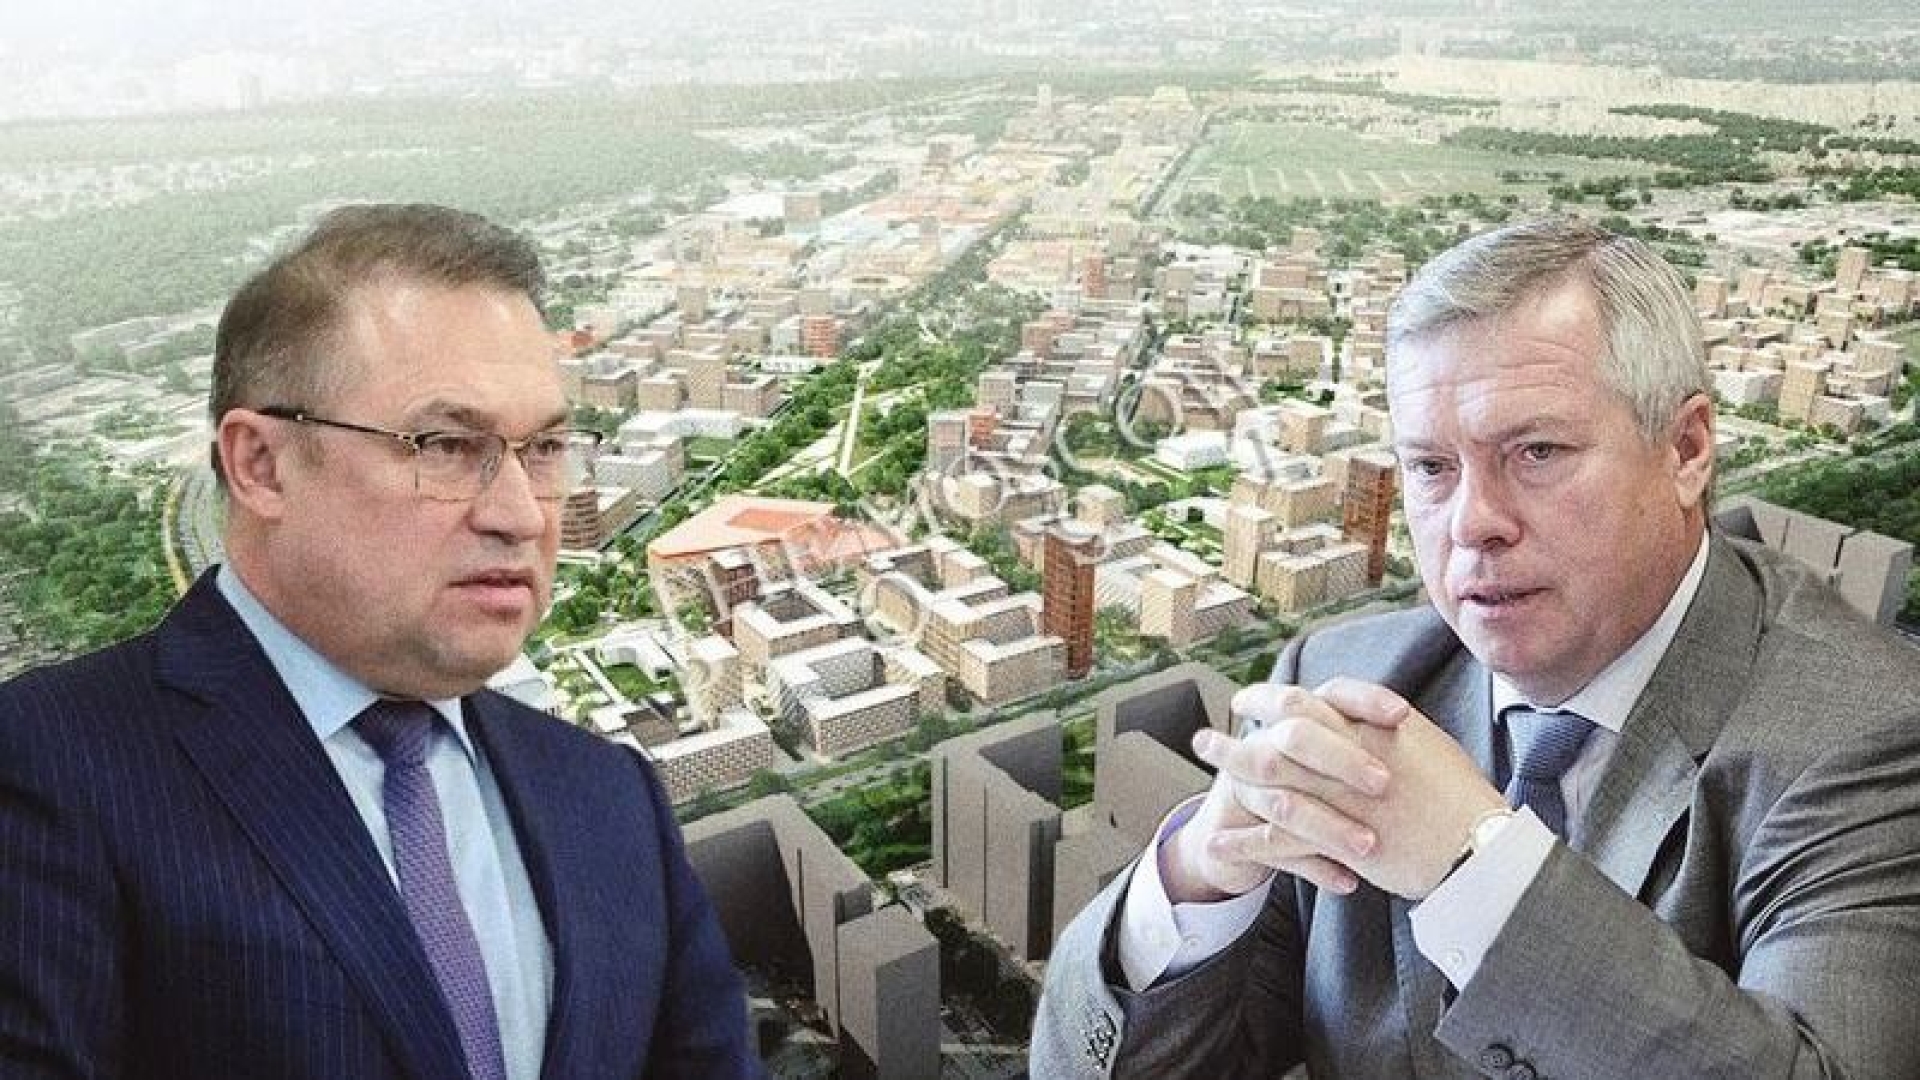 "Corporation" Golubeva: Vice-Governor Goncharov left "with things" to master the airport